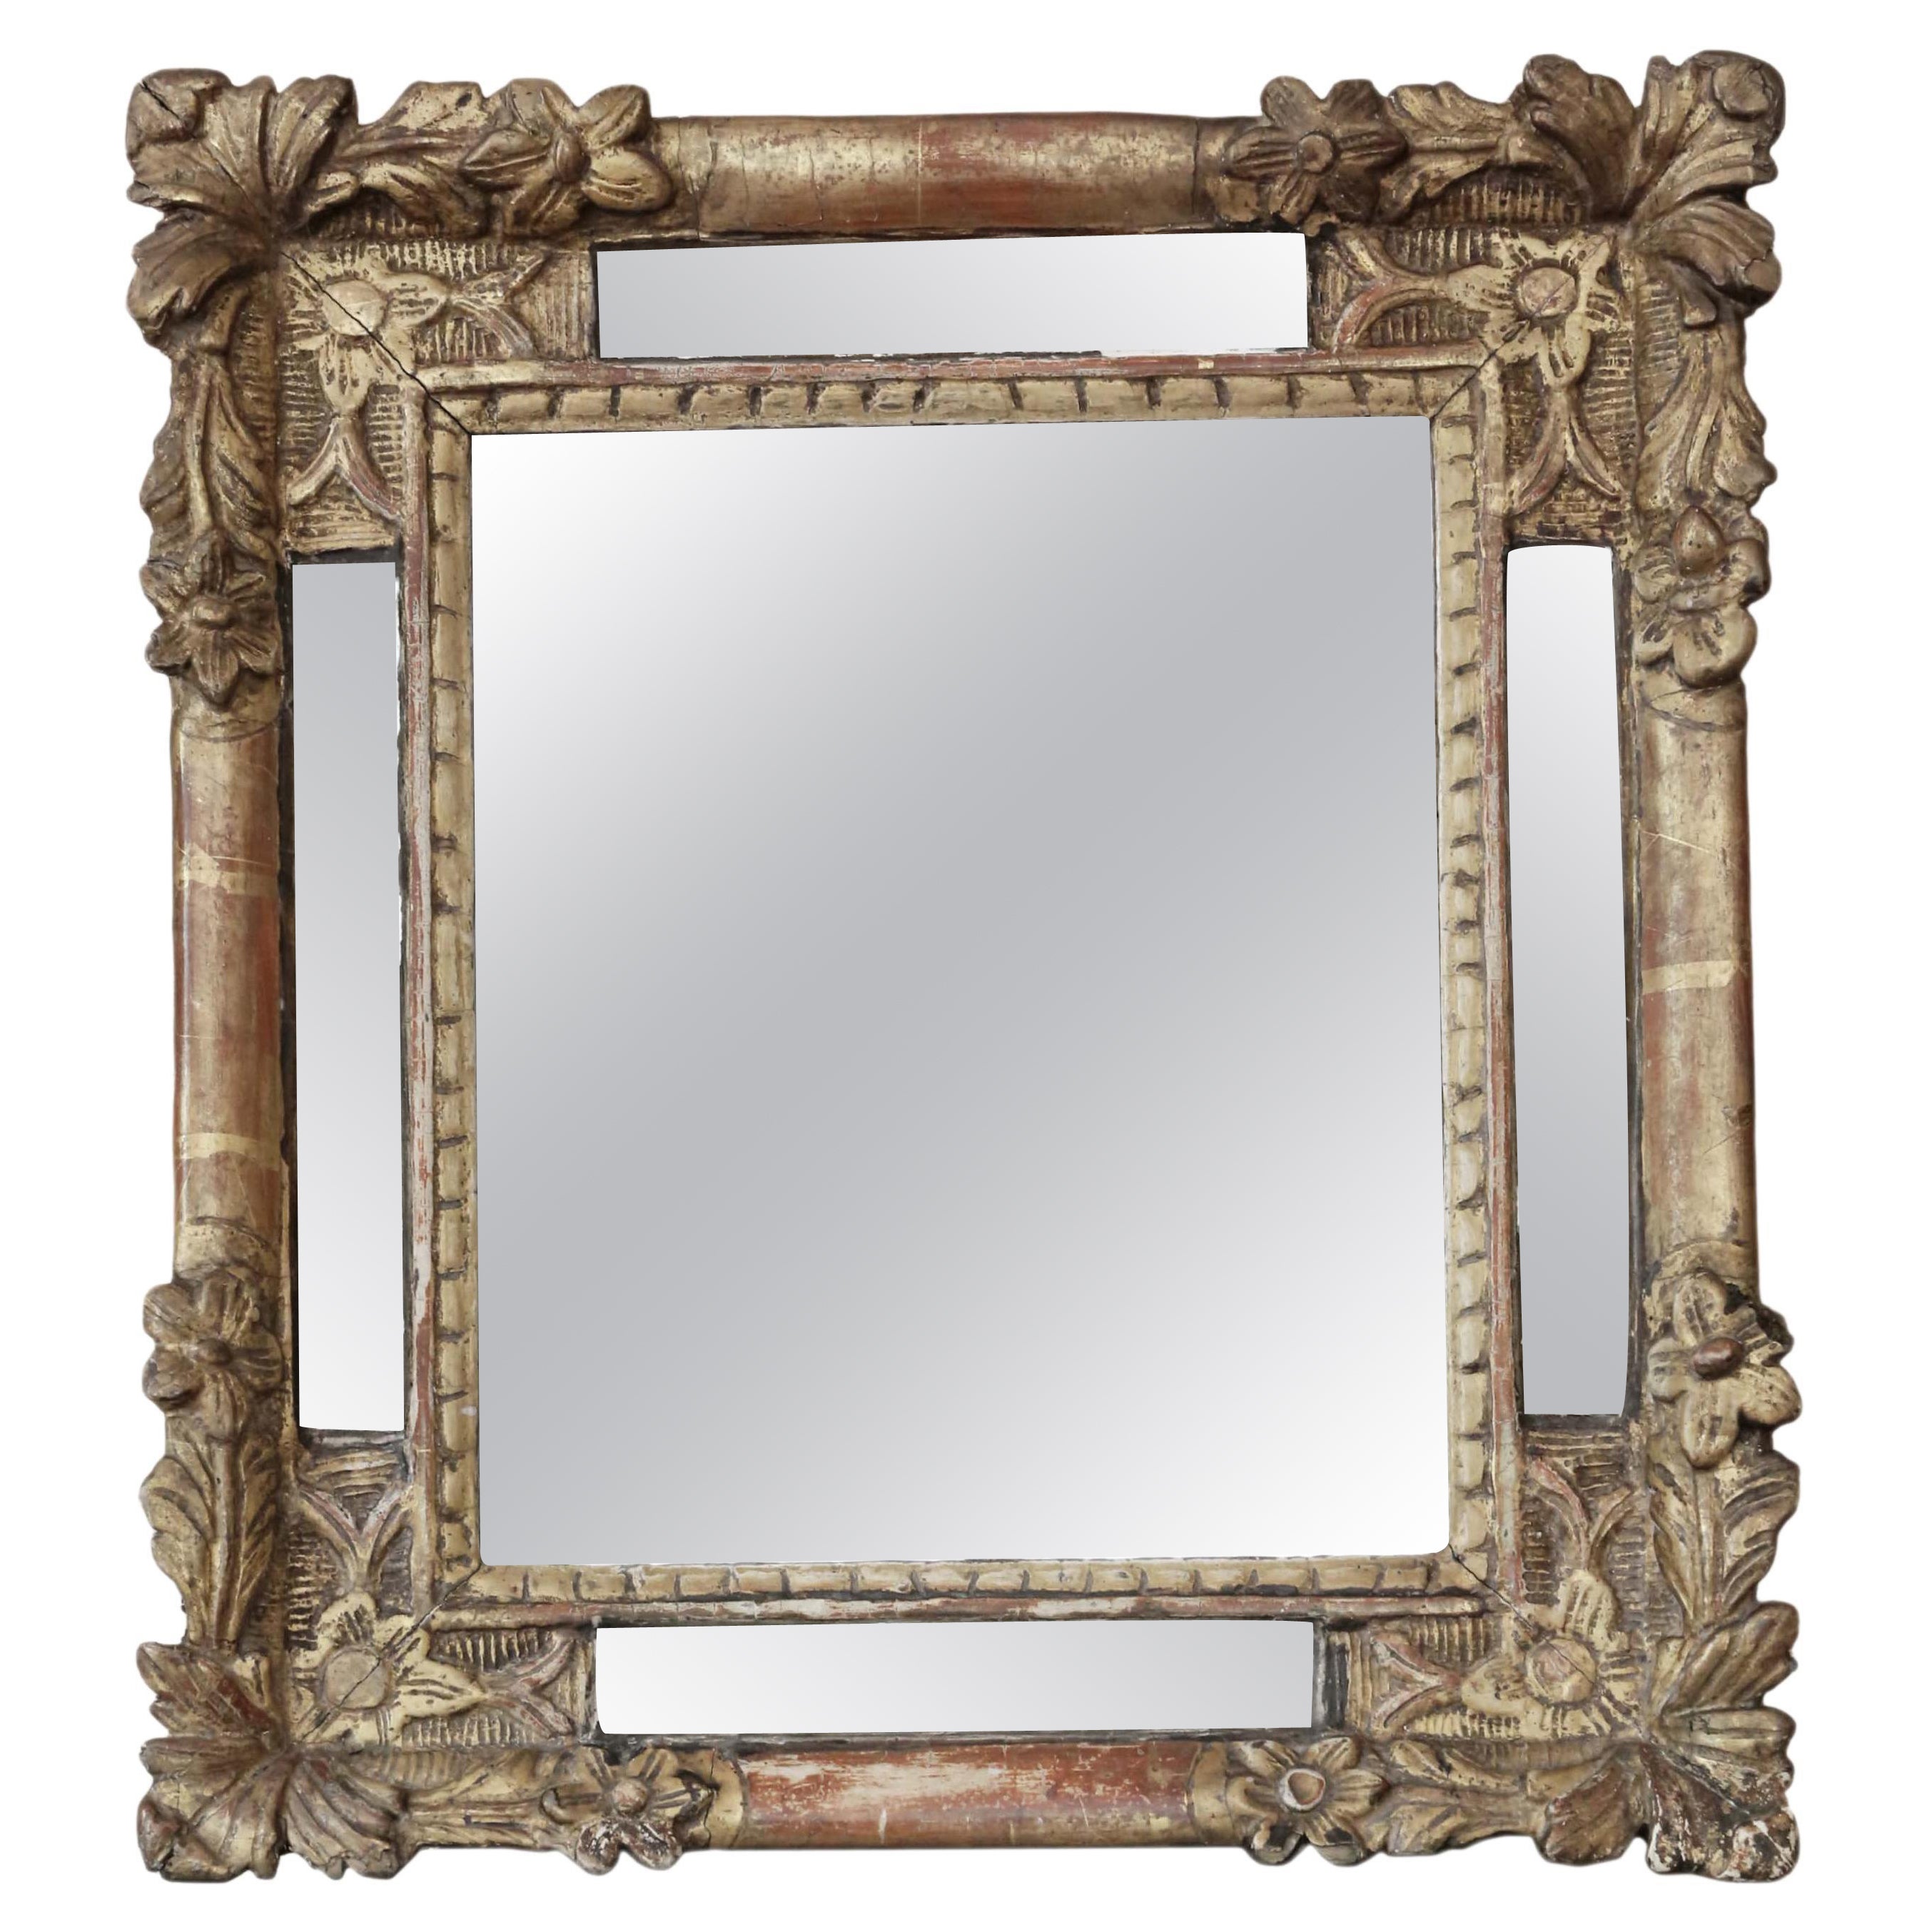 Antique Gilt Overmantle Wall Mirror Early 19th Century